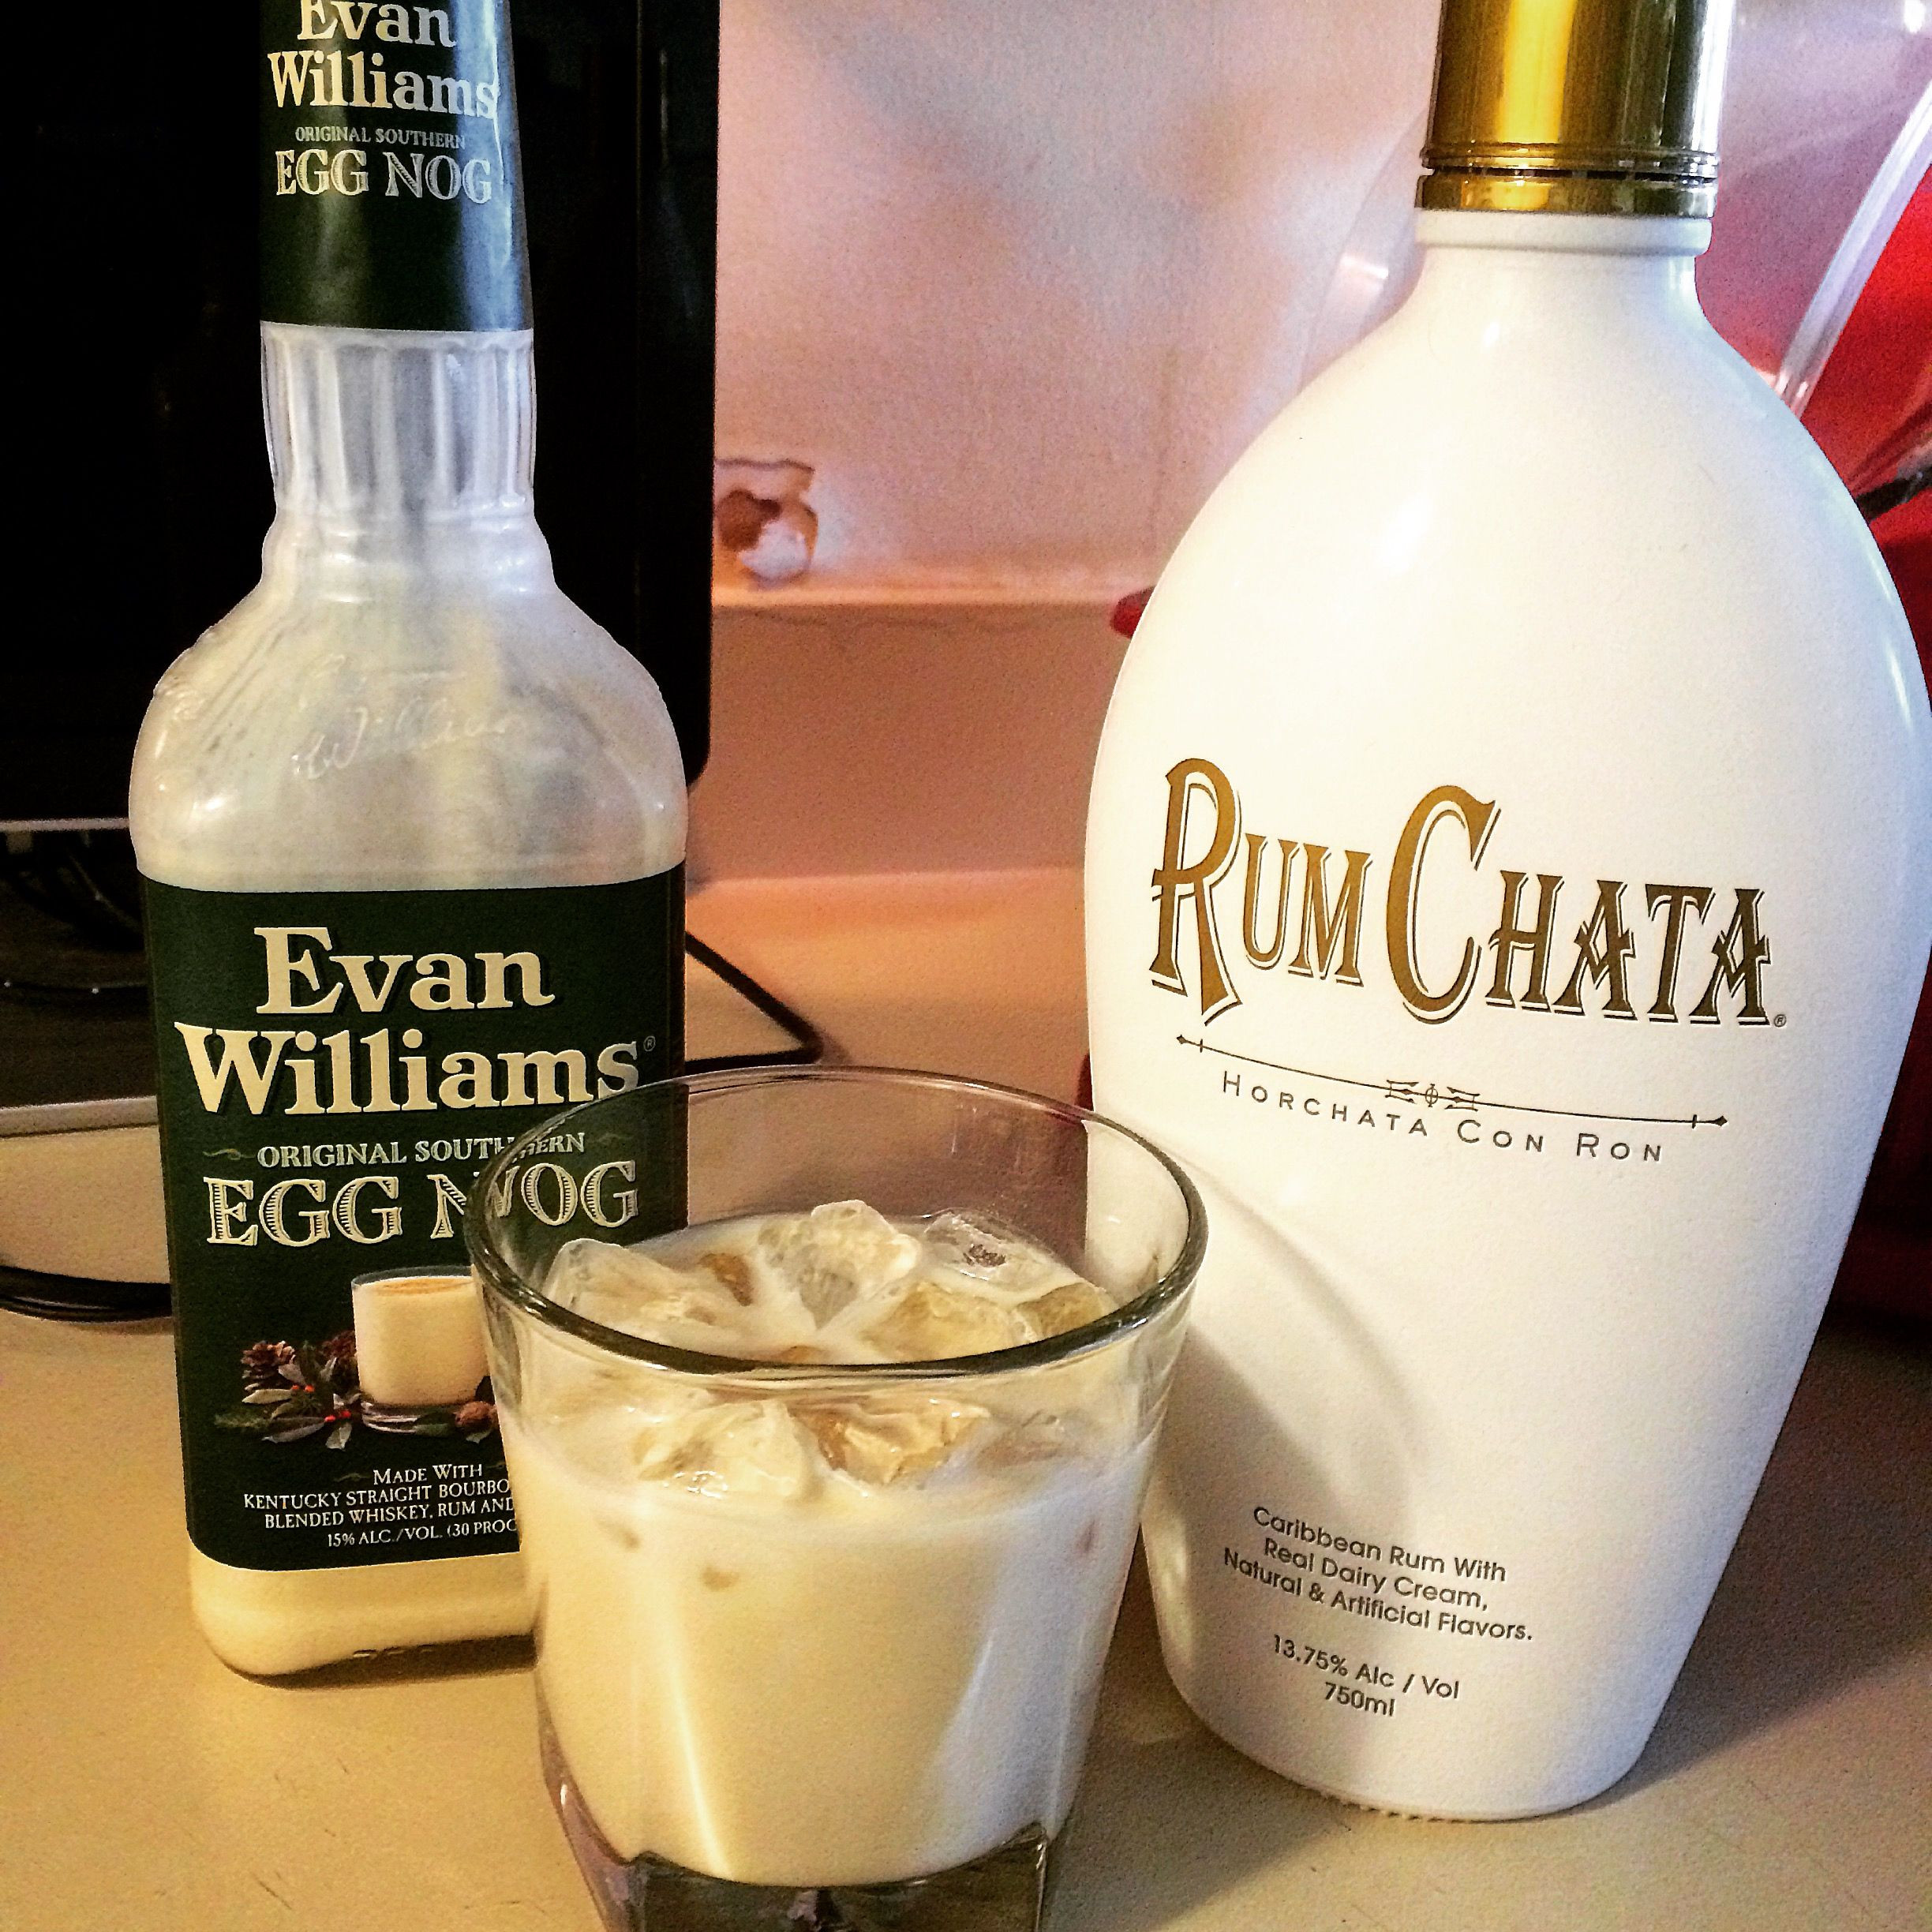 15 Recipes for Great is Eggnog Alcoholic